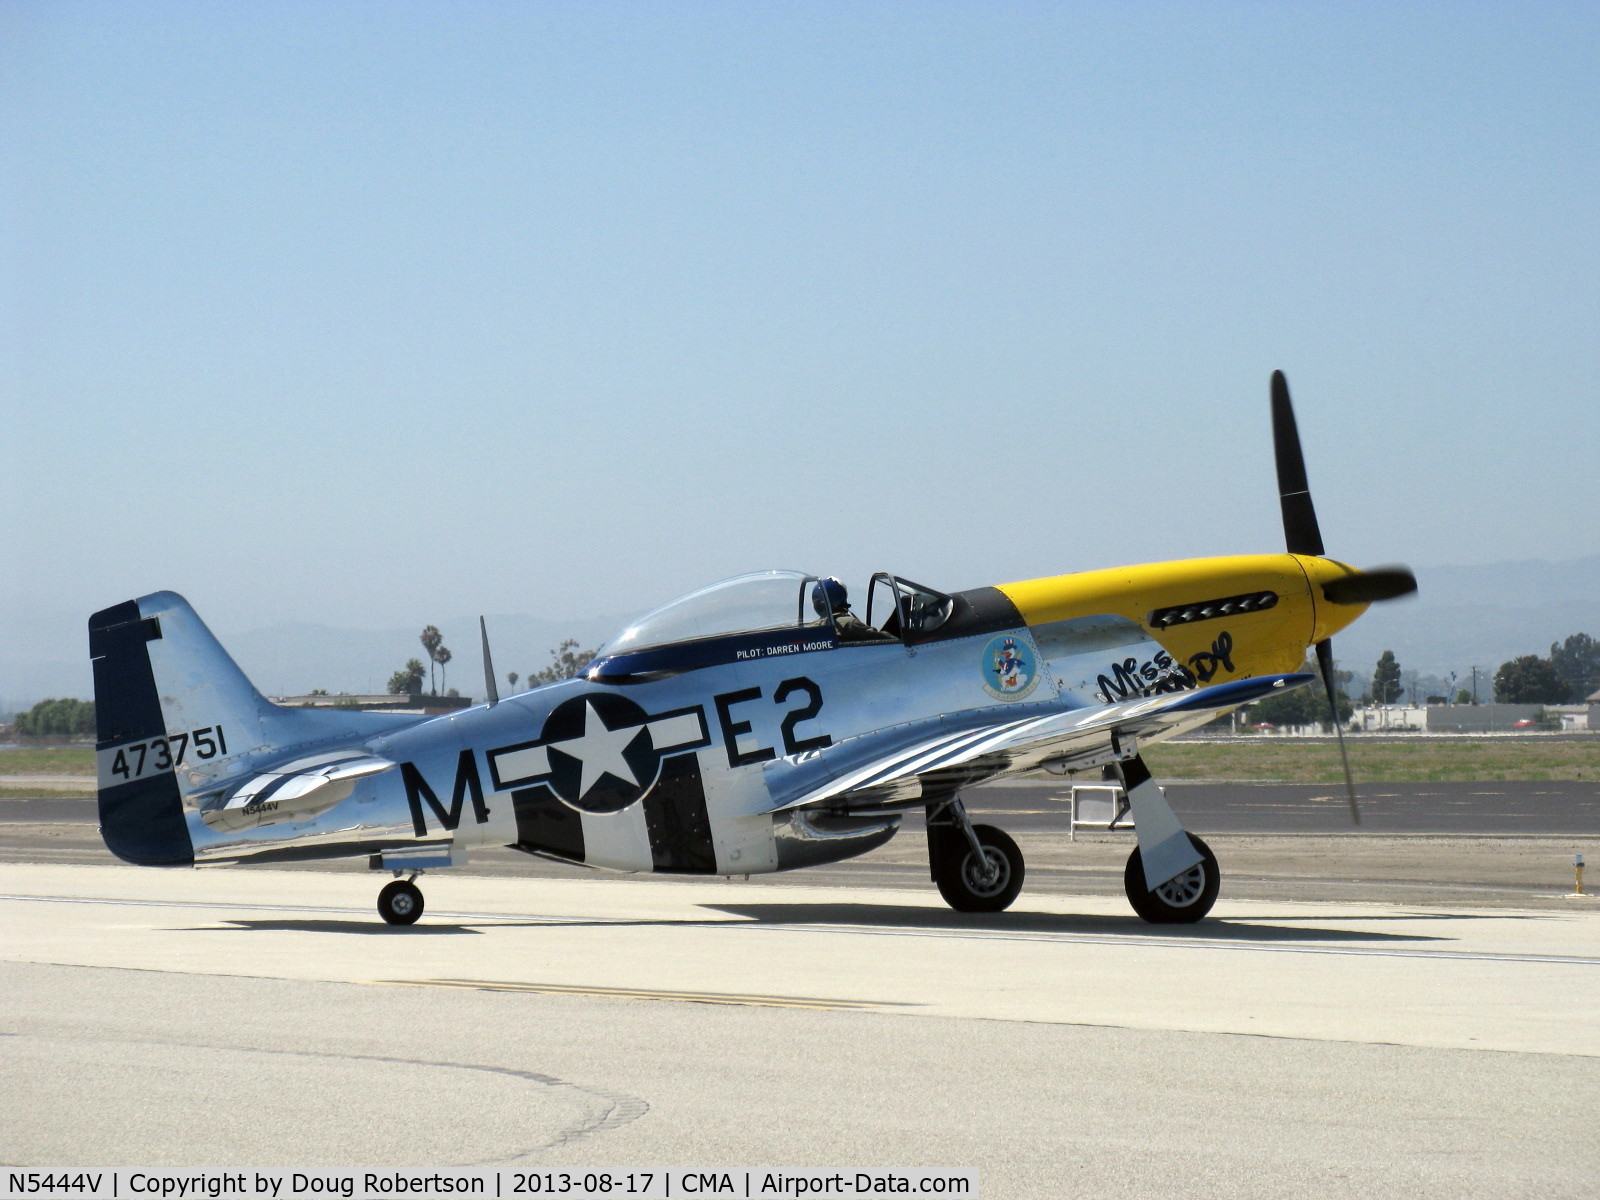 N5444V, 1944 North American F-51D-25-NA Mustang C/N 122-40291, 1944 North American F-51D MUSTANG 'Miss Kandy', Packard-Rolls V1650, Limited class, taxi